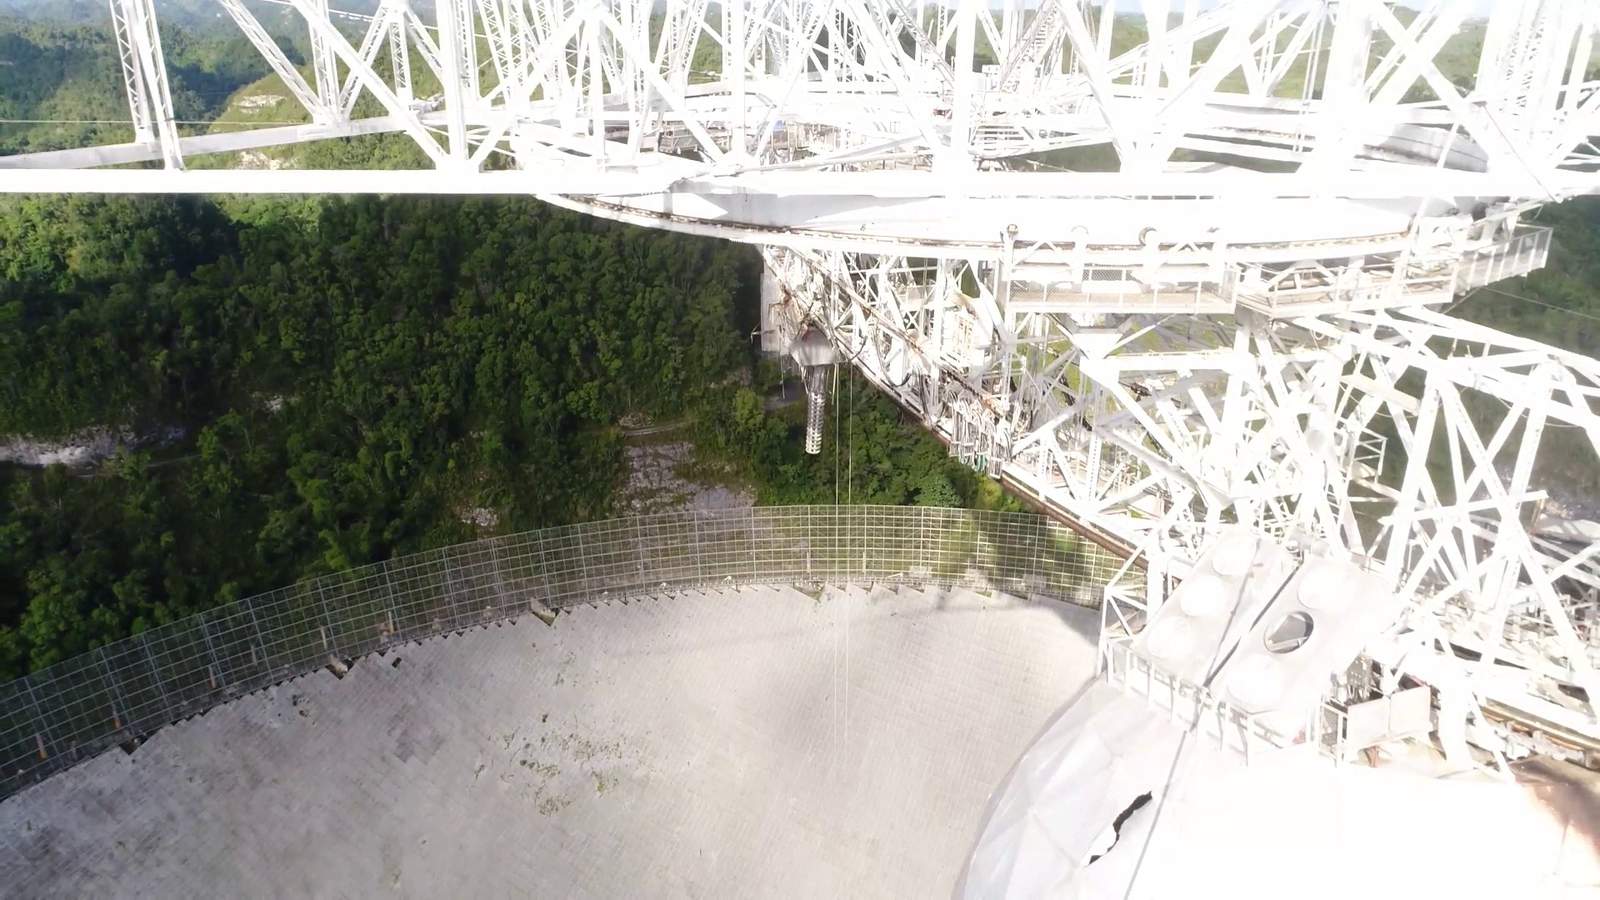 Damages another test for resilient Arecibo Observatory but the science goes on